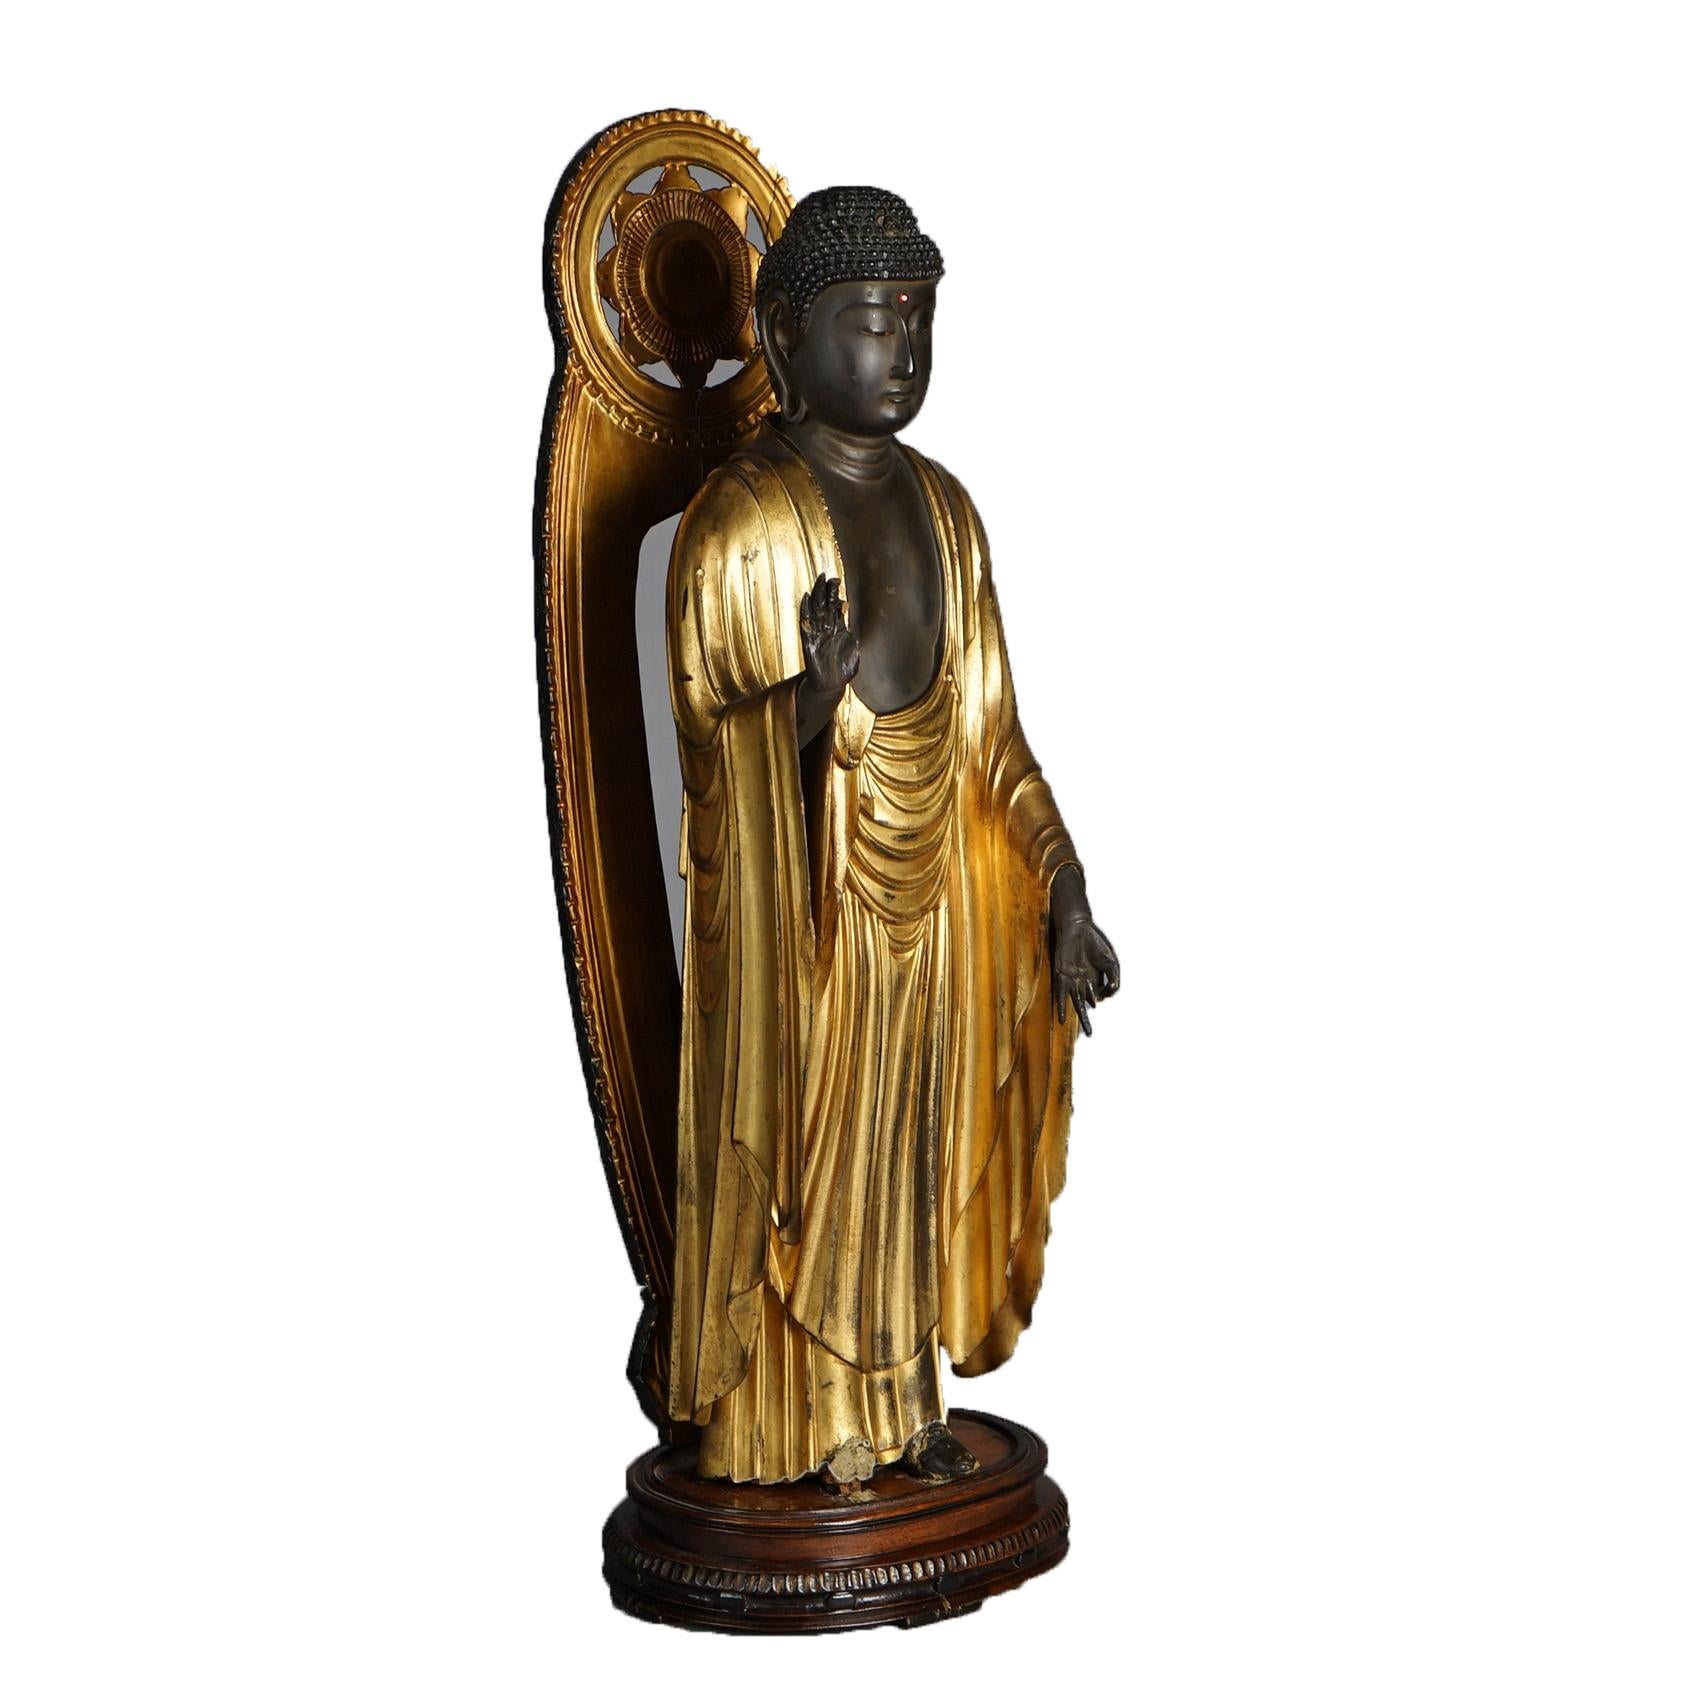 Antique Japanese or Tibetan Polychromed Giltwood Carved Standing Buddha & Stand 19th C

Measures- 22.5''H x 6.5''W x 6.5''D